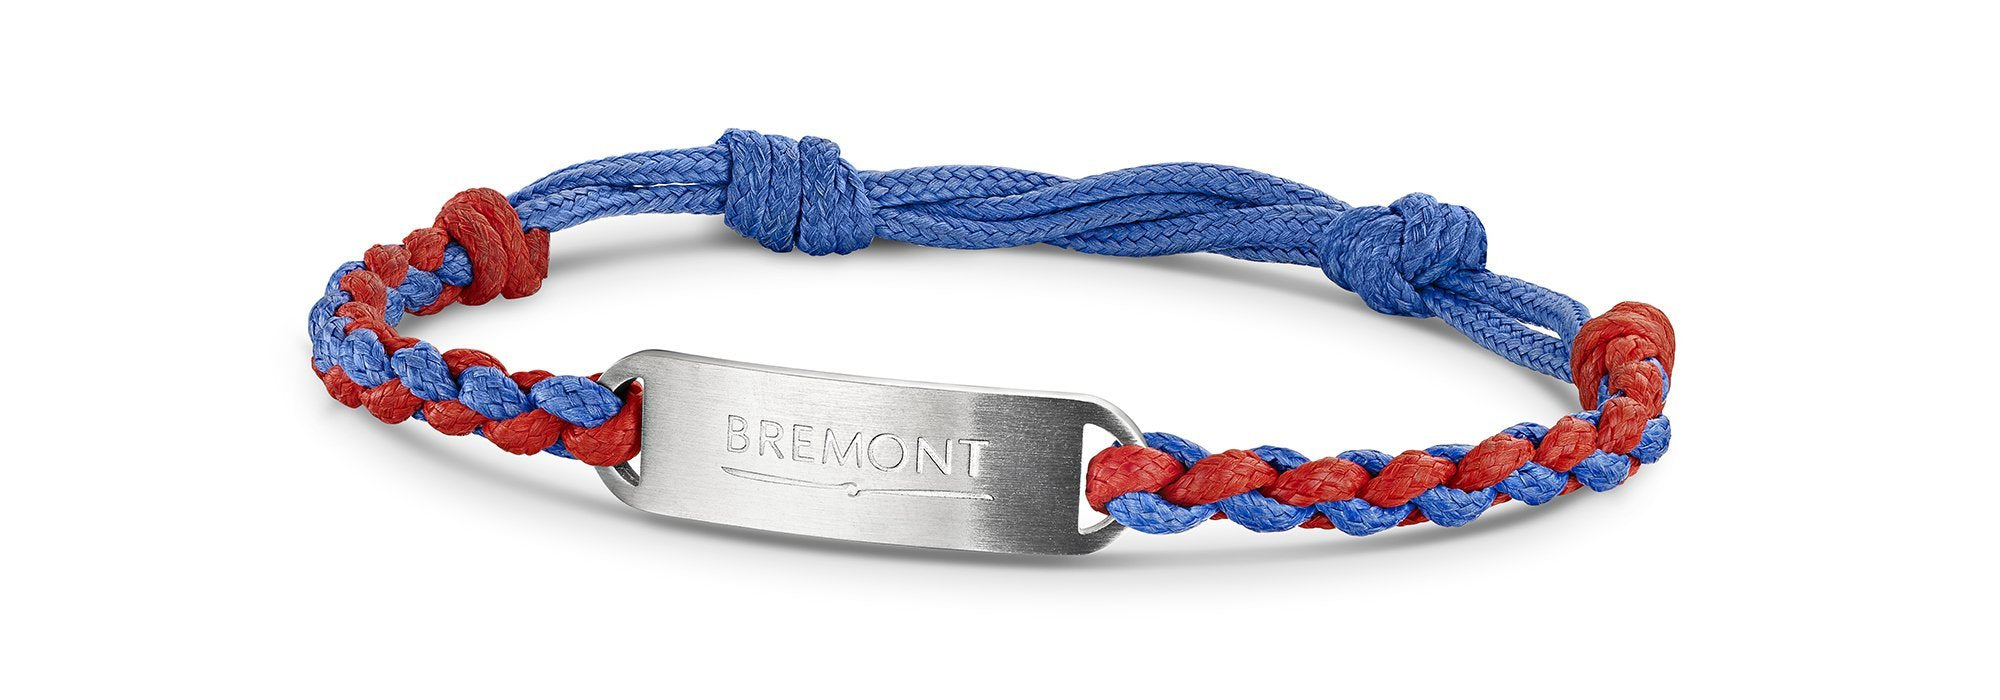 BREMONT RELEASES BRACELET TO RAISE FUNDS FOR 'FOOD4HEROES'